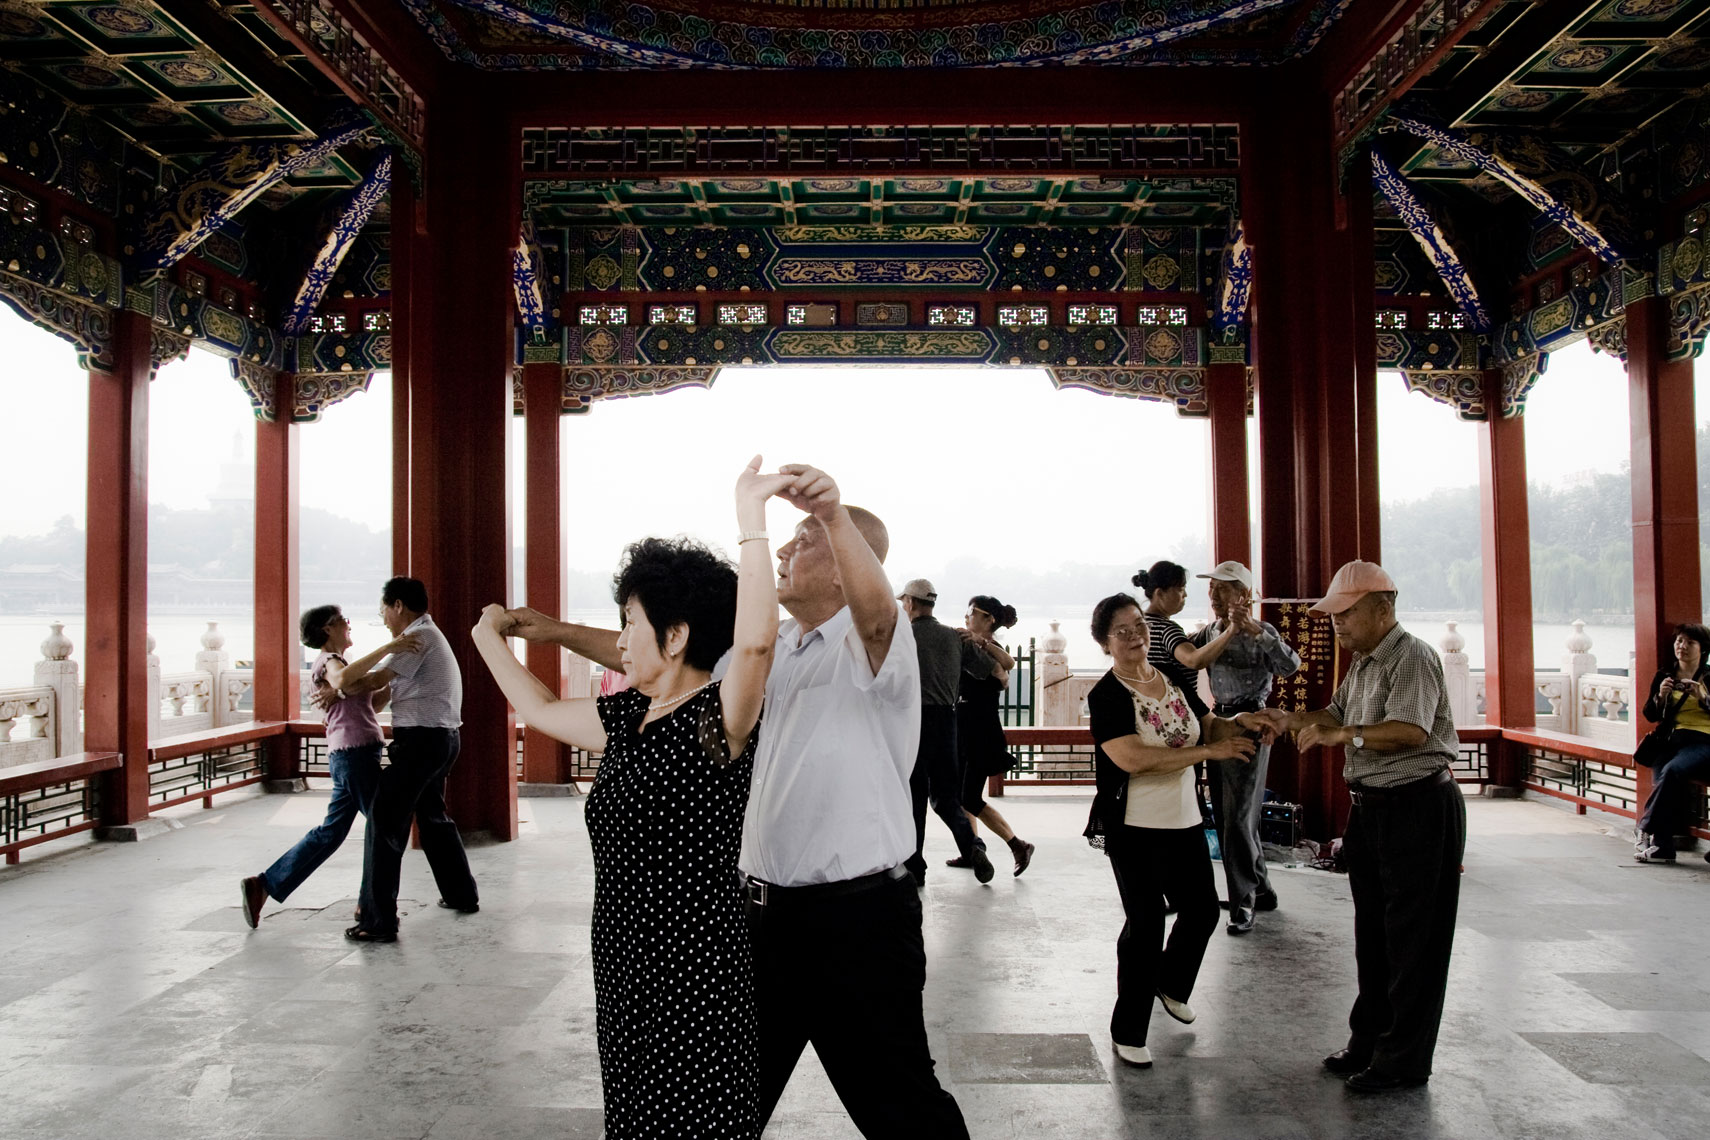 CHINA. Beijing, September 2012. People dance in Beihai Park. Chinese people gather in parks and public spaces to enjoy mutliple activities such playing cards, dancing, exercising, tai-chi practicing.